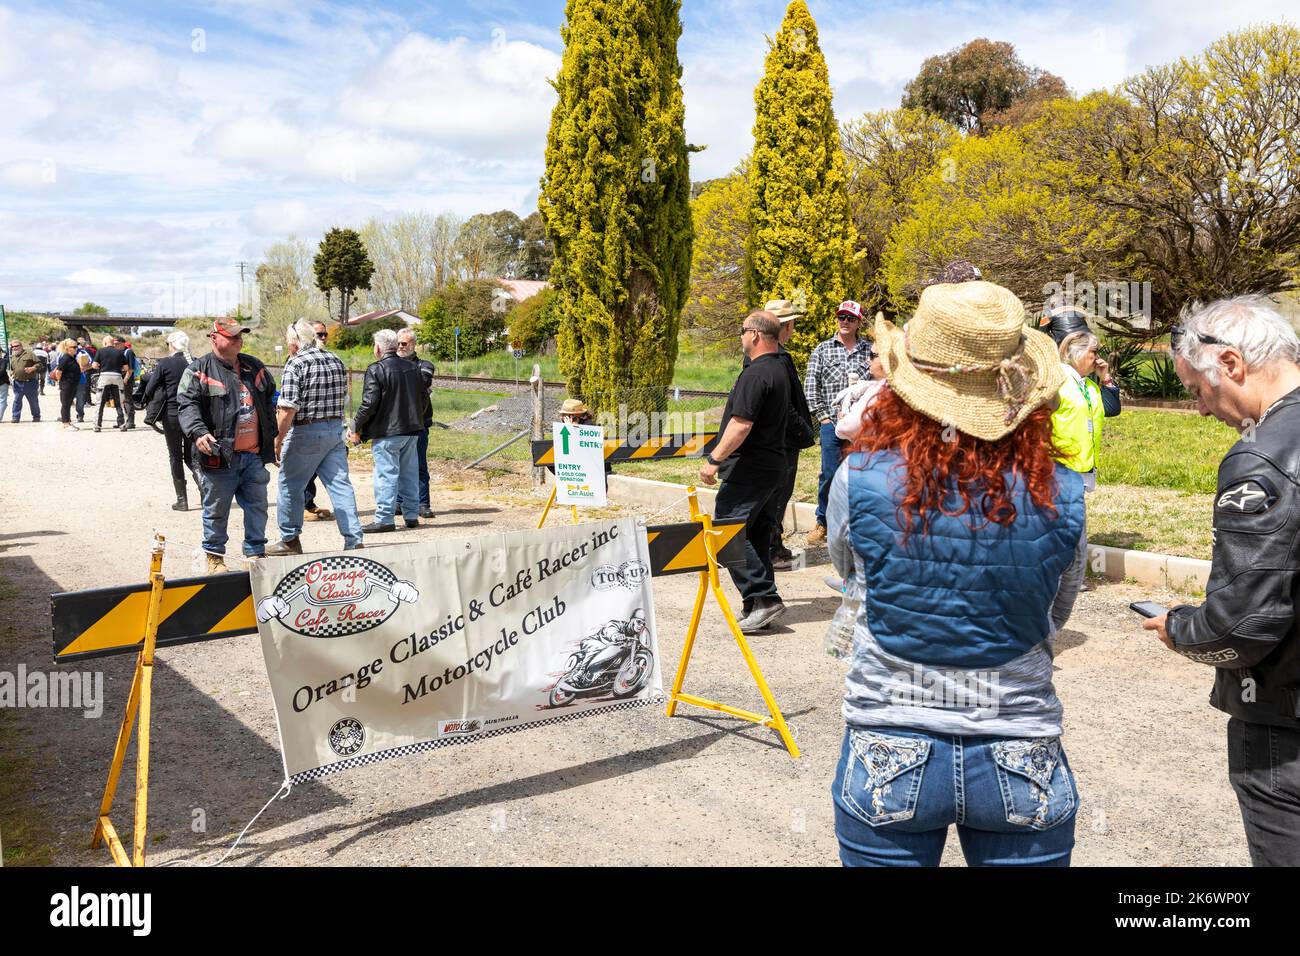 Millthorpe historic village town in New South Wales, Orange motorcycle club event show for classic and cafe racer motorcycles,NSW,Australia woman Stock Photo